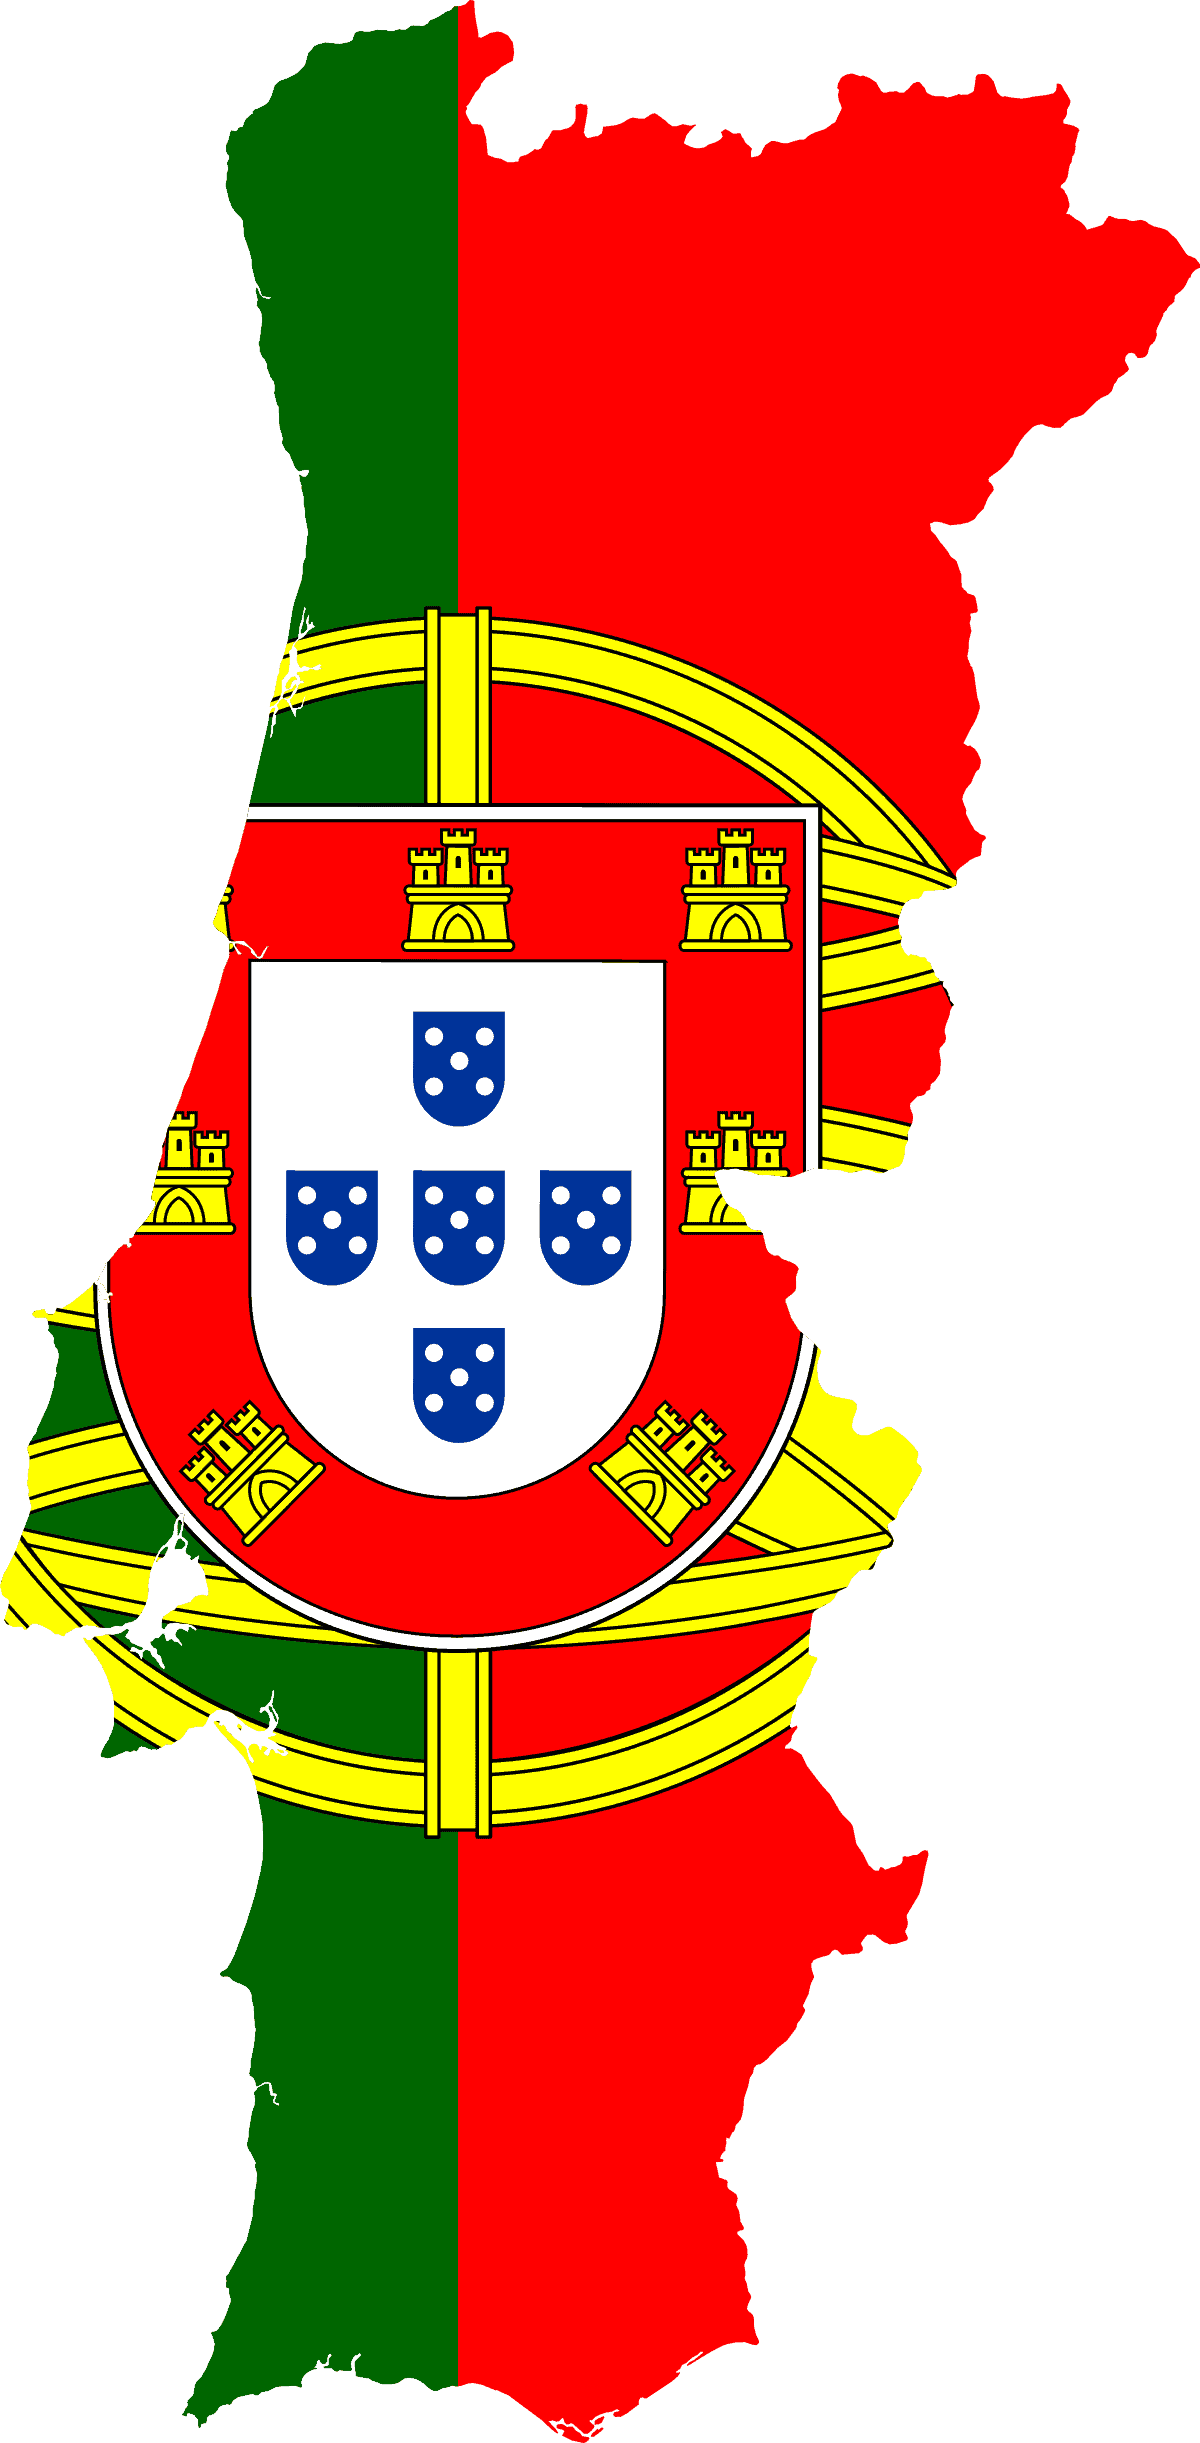 Flag map of Portugal